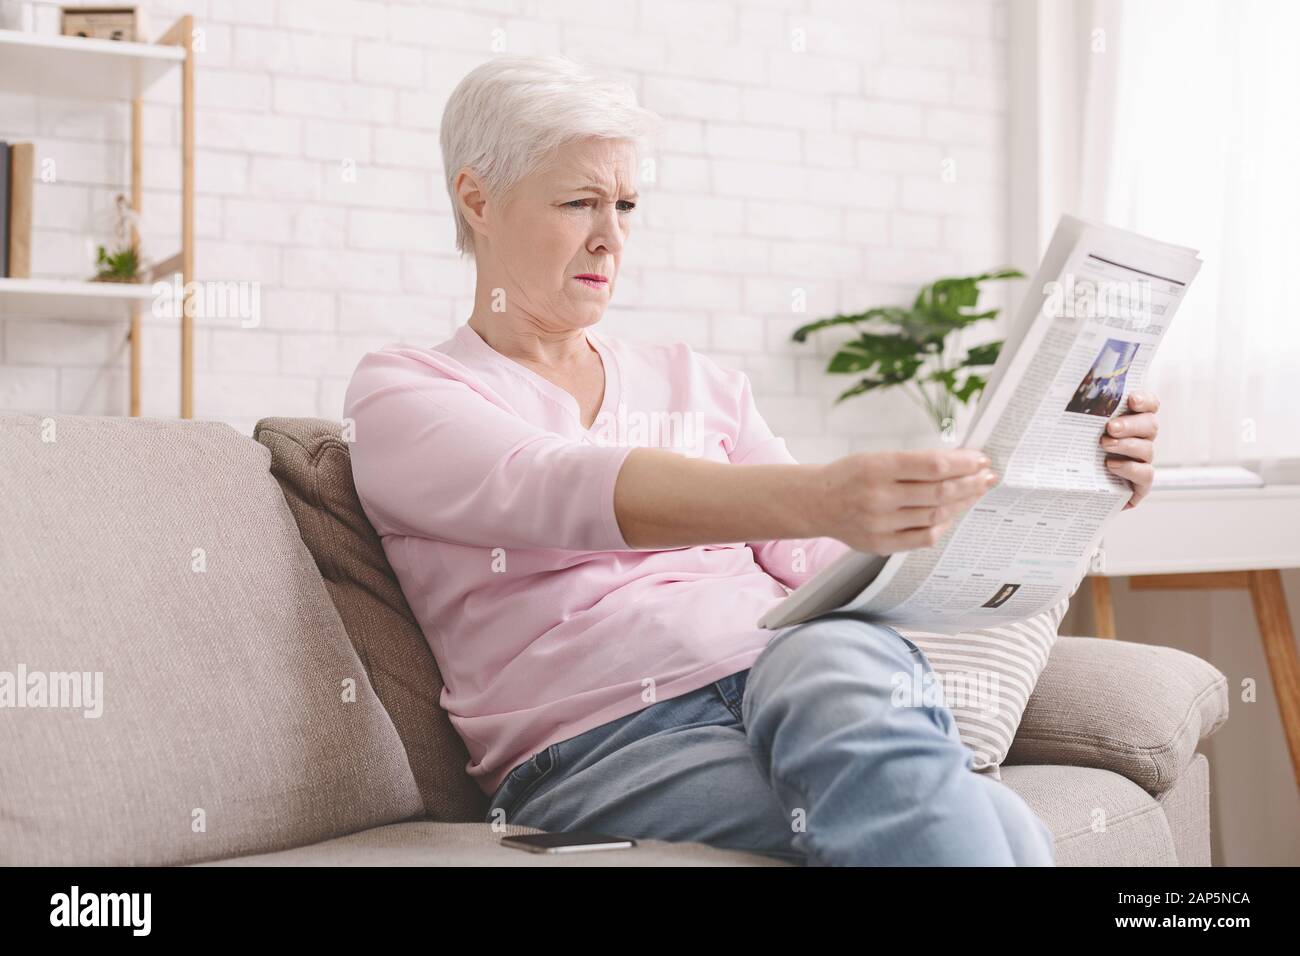 Senior lady squinting and holding newspaper far from eyes Stock Photo